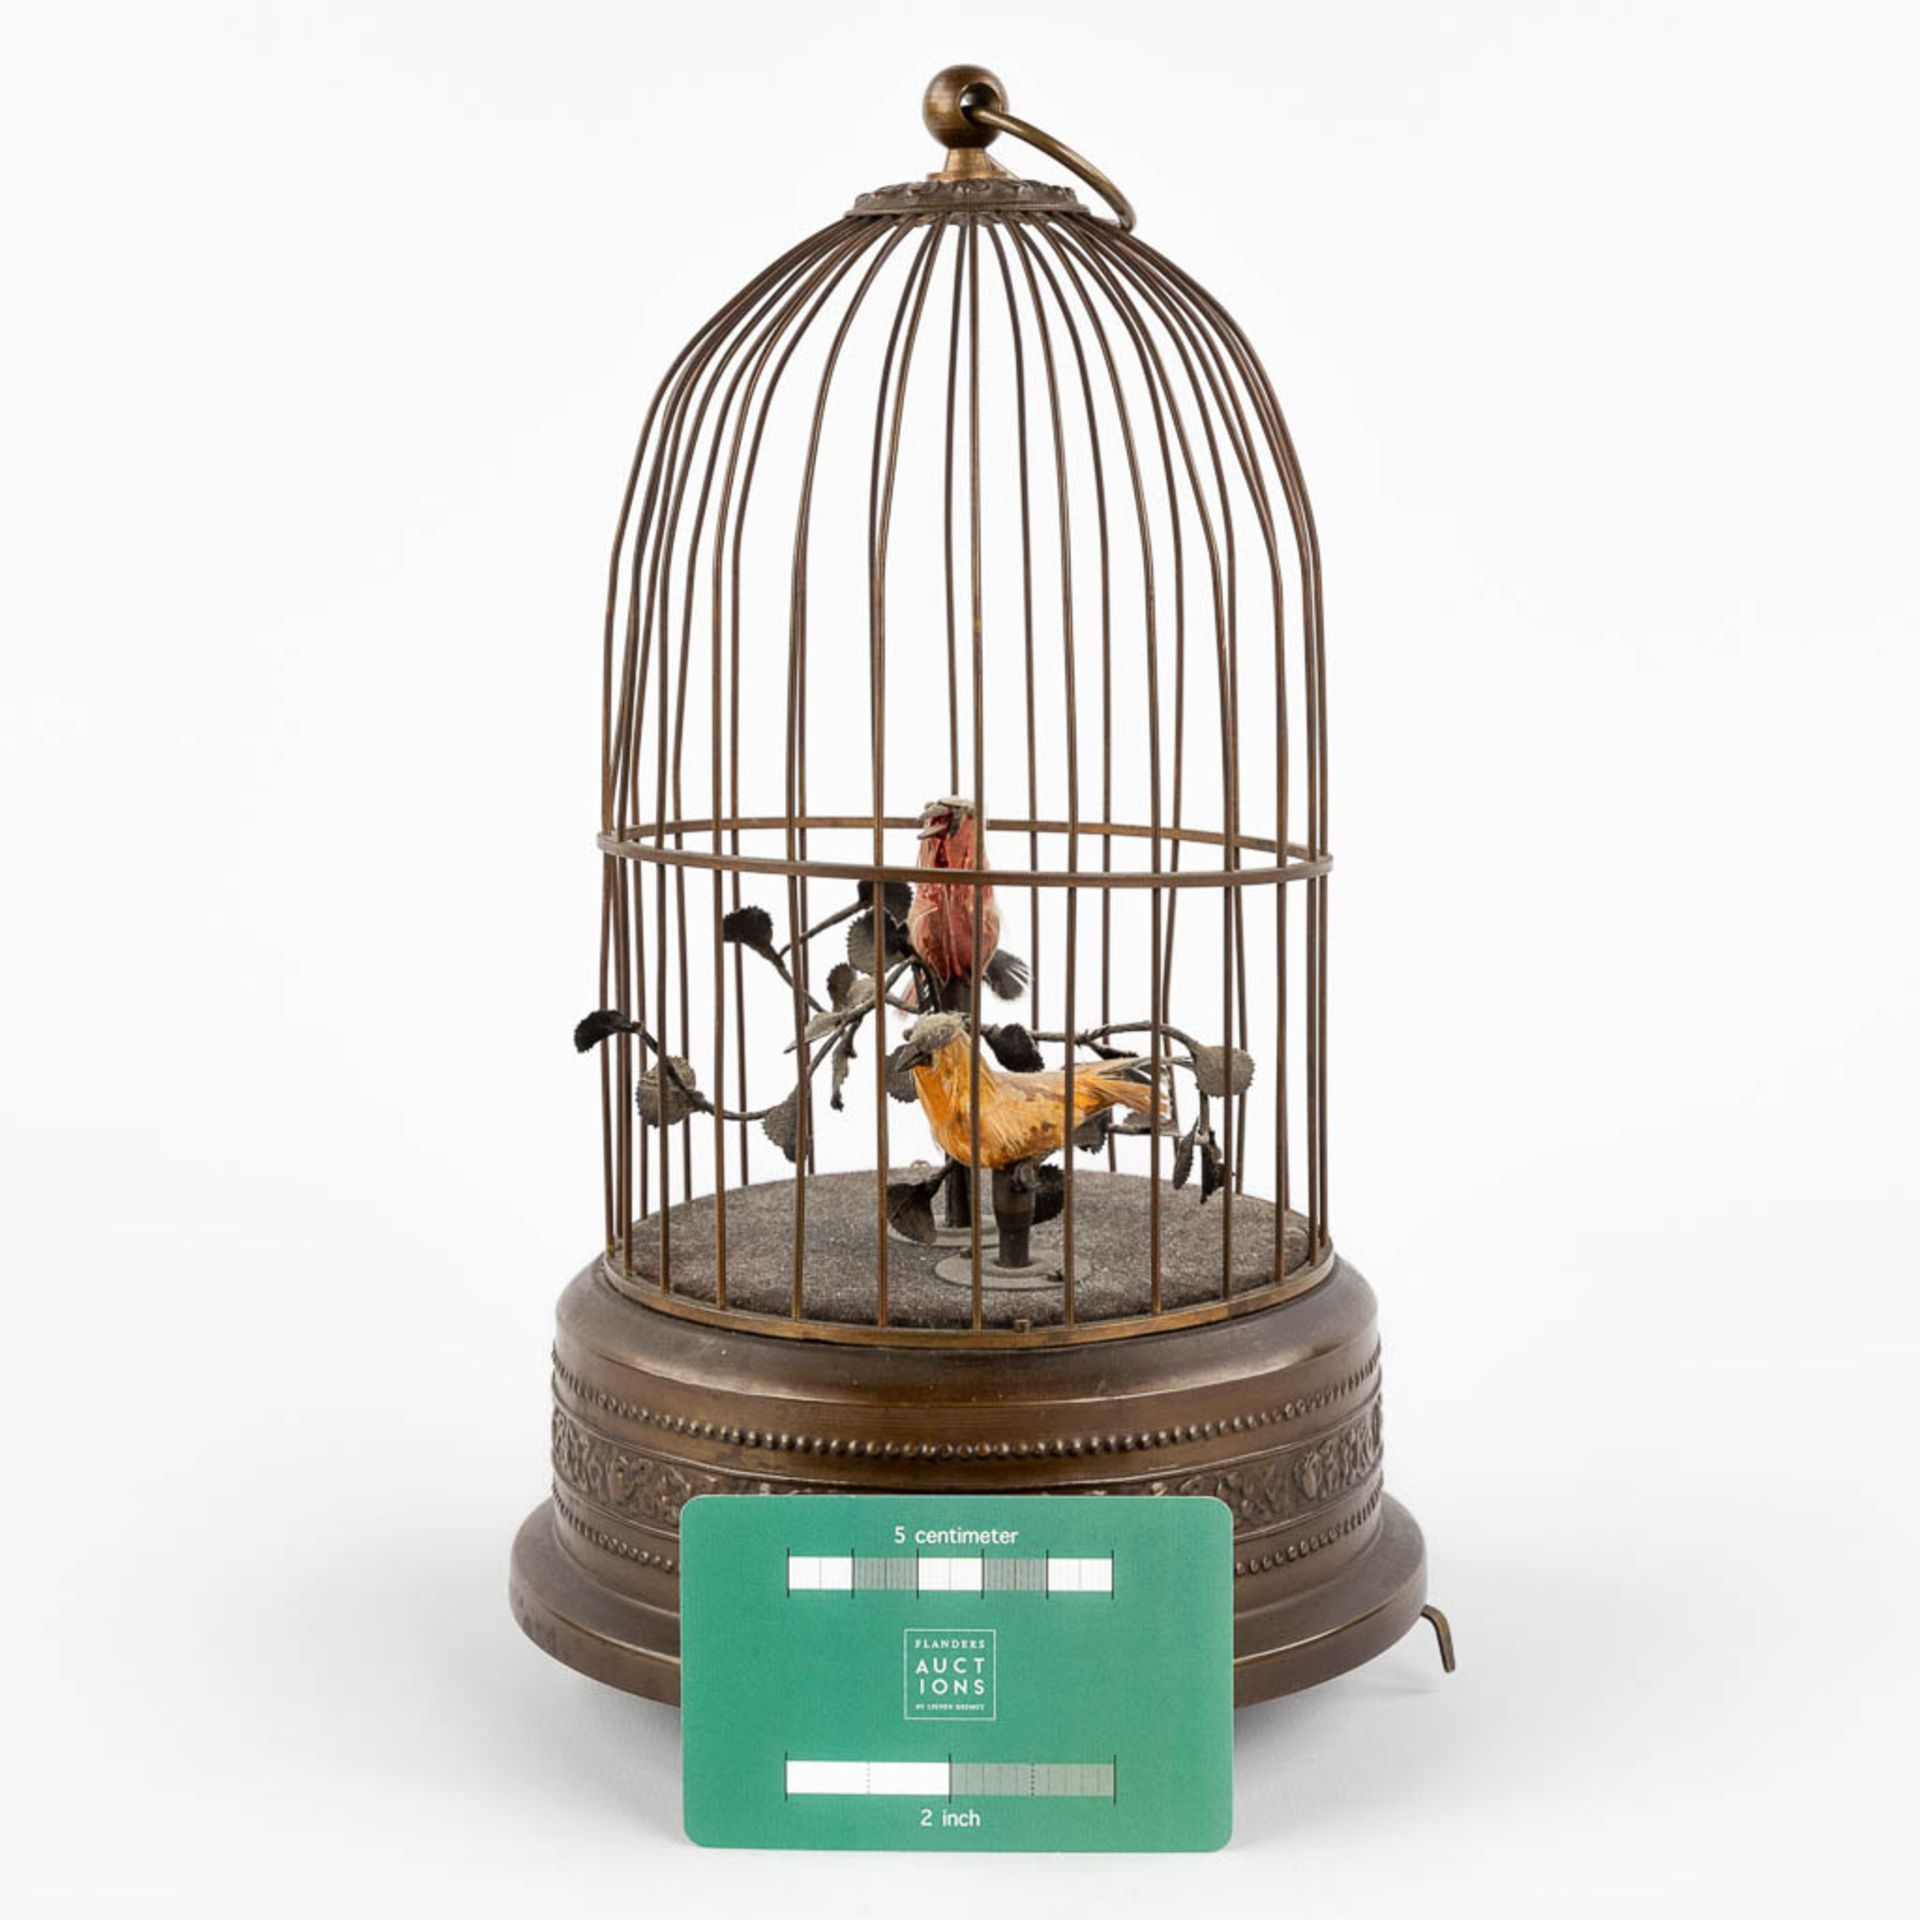 A bird cage automata with a music box. (H:28 x D:15,5 cm) - Image 2 of 12